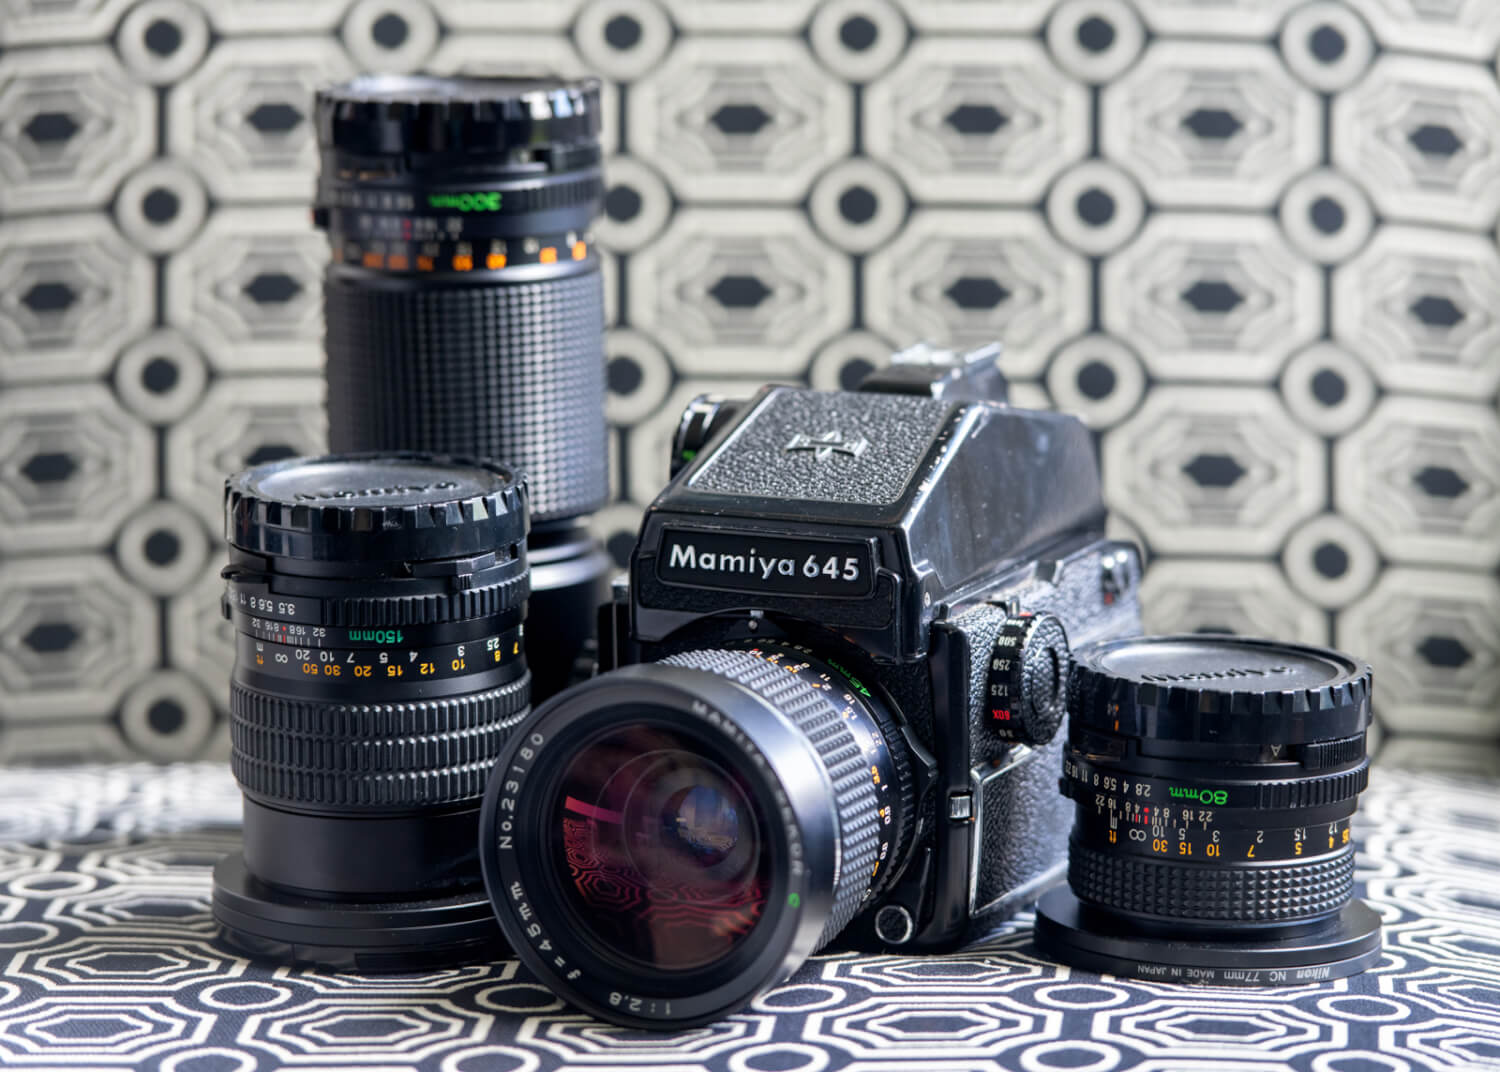 Mamiya 645 1000s with a selection of manual focus Sekor-C prime lenses